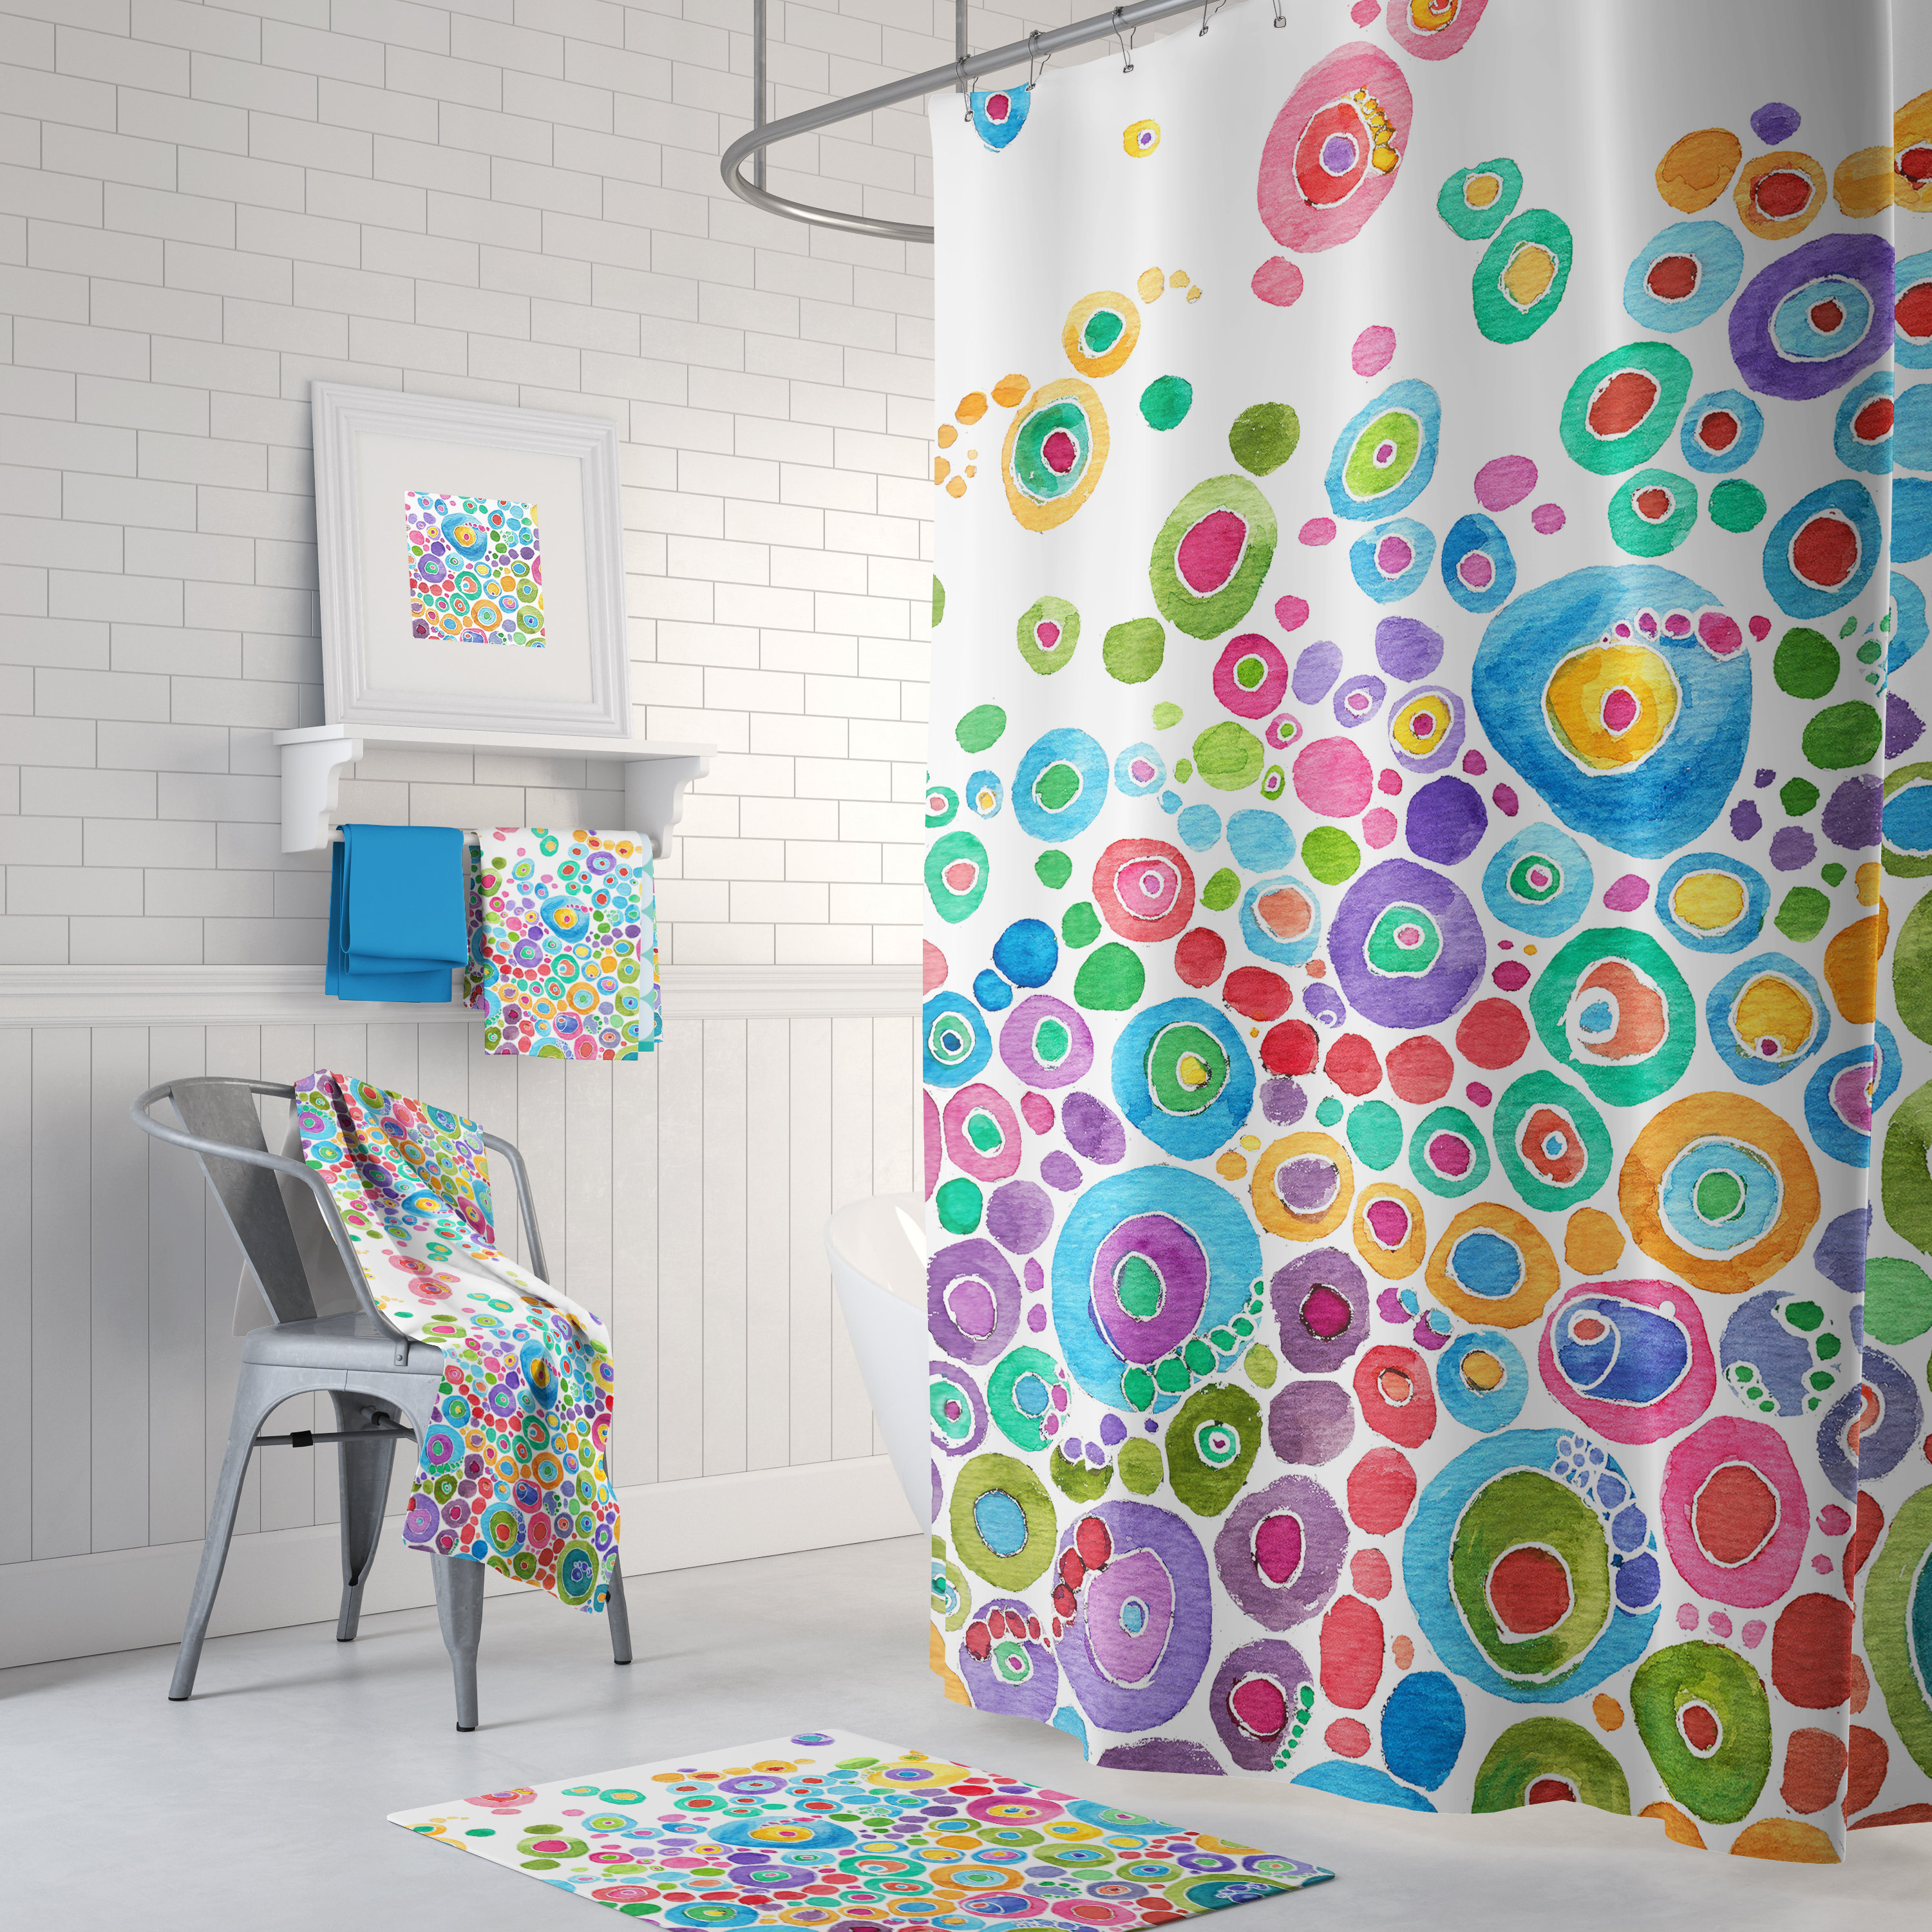 Colorful Circles Shower Curtain Inner Circle Design, Popular